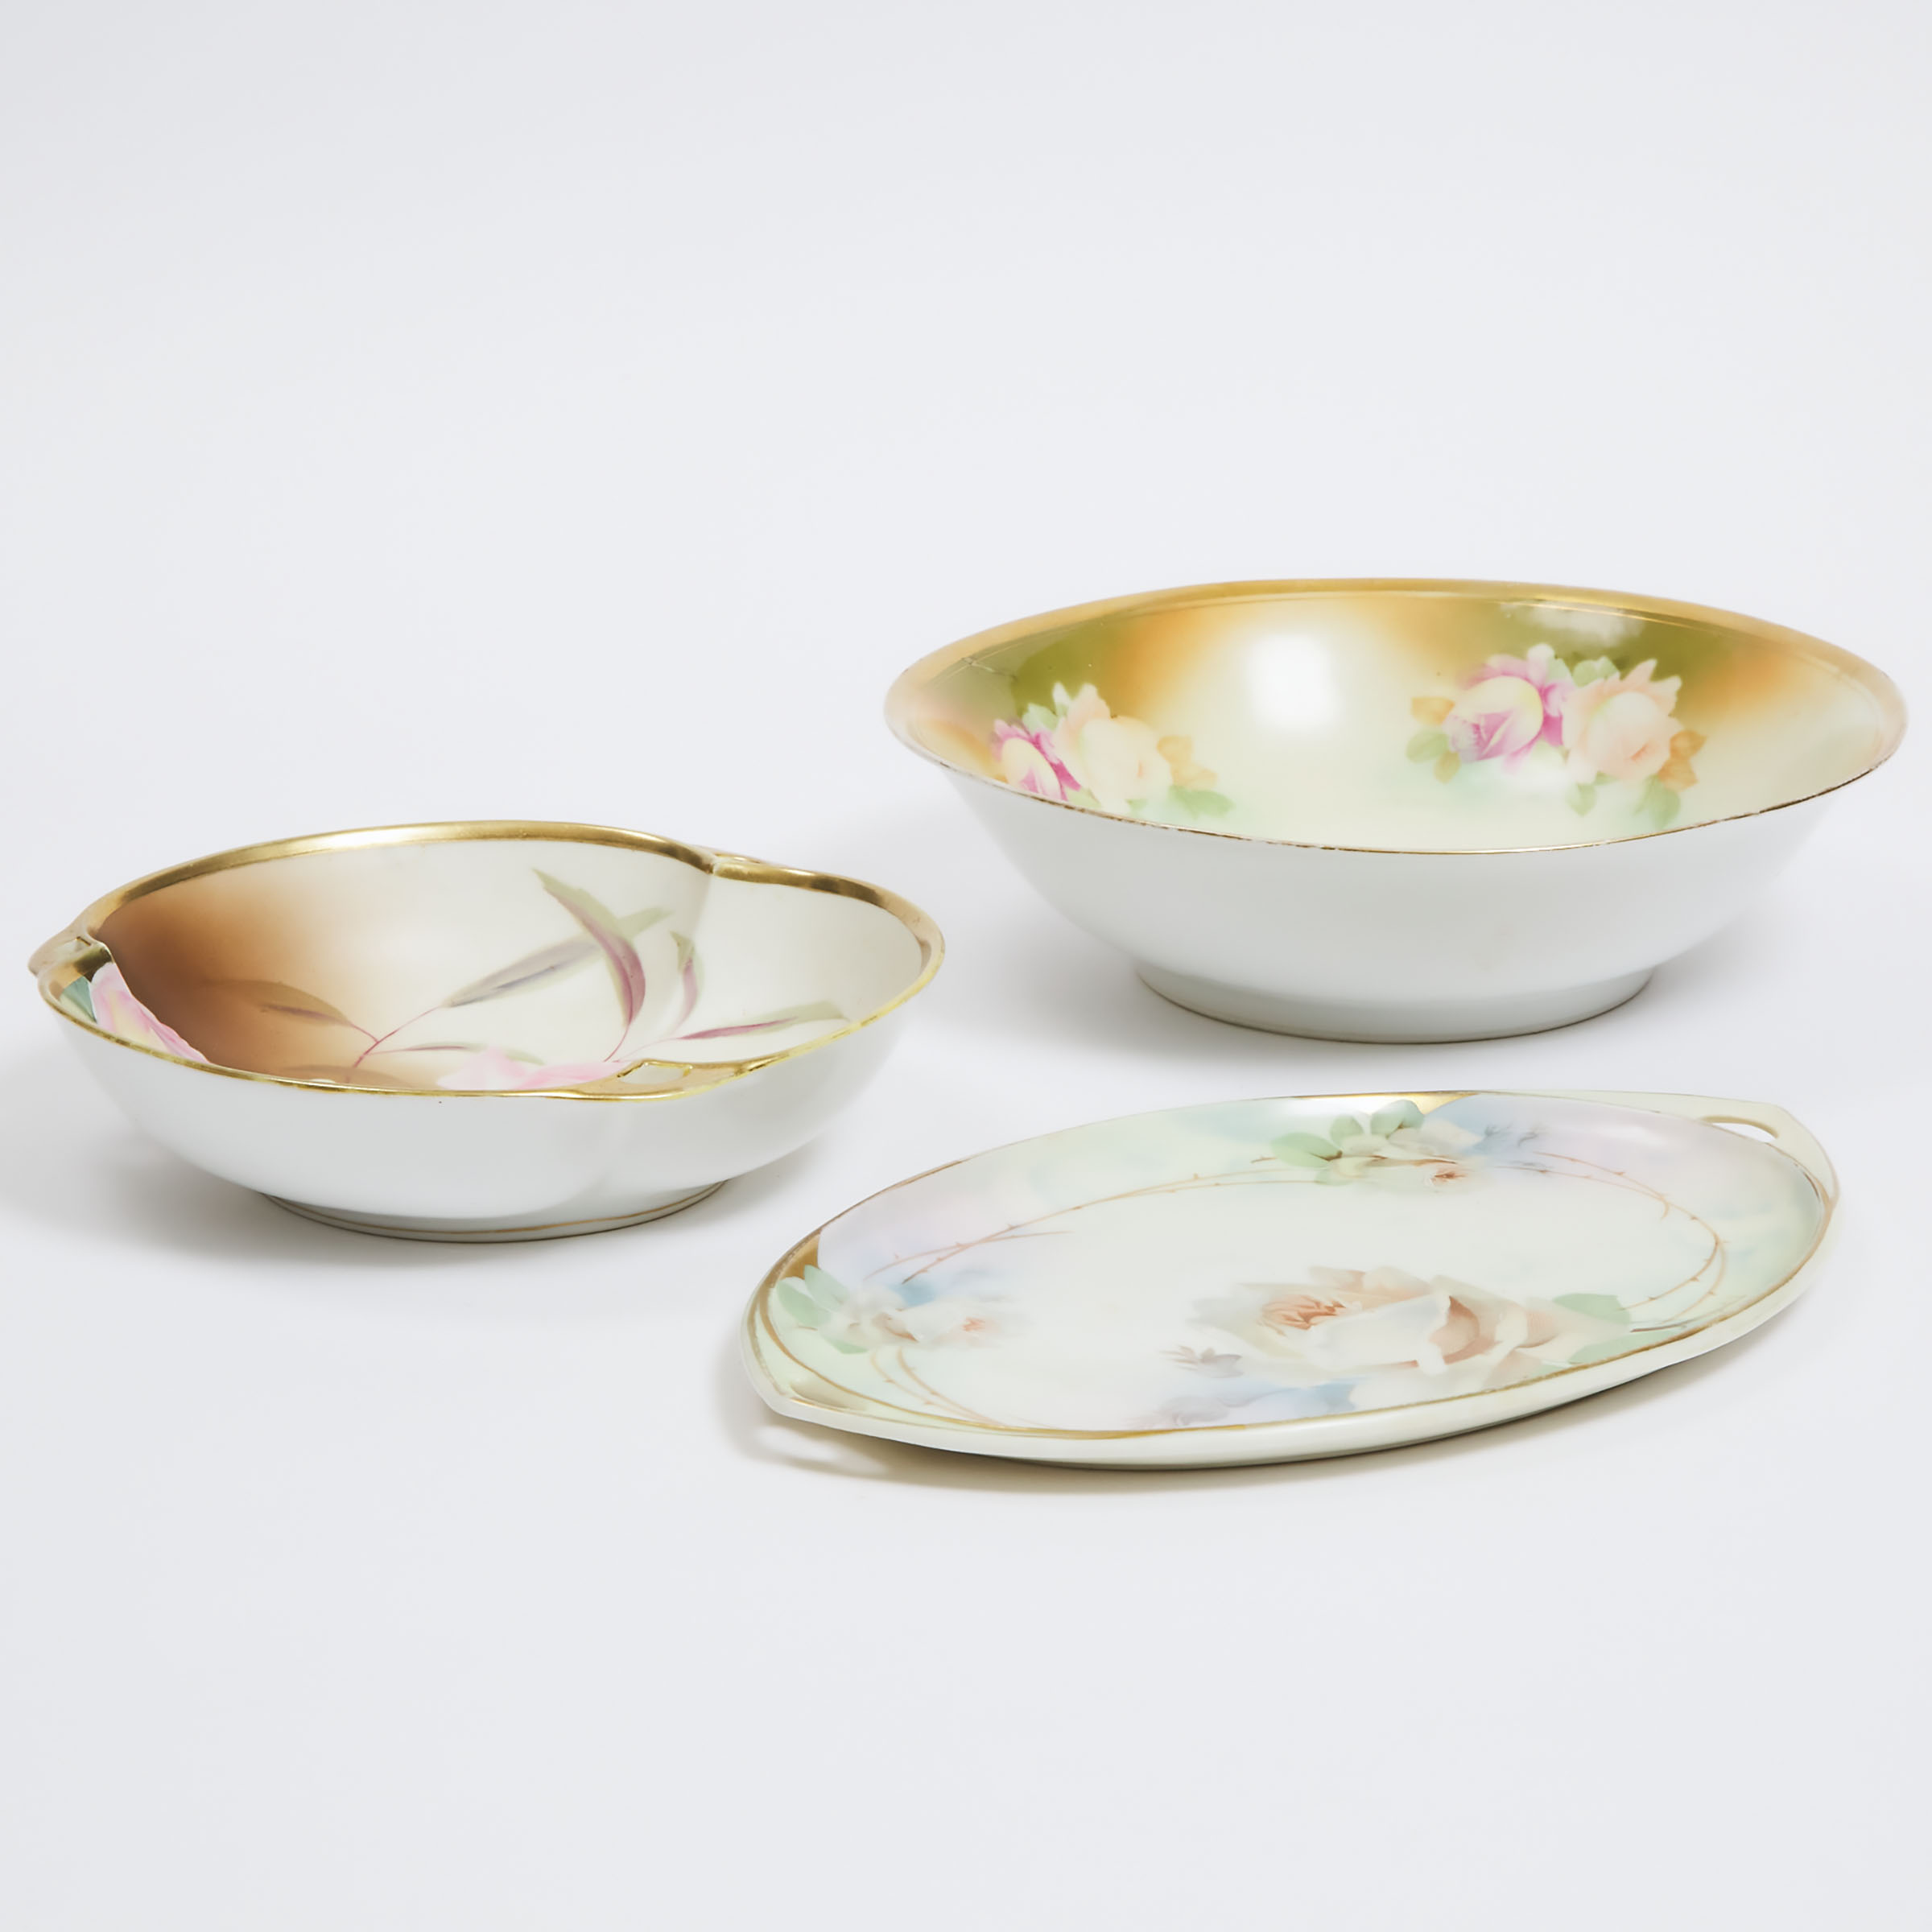 Two Floral Porcelain Bowls and a Tray, 20th century